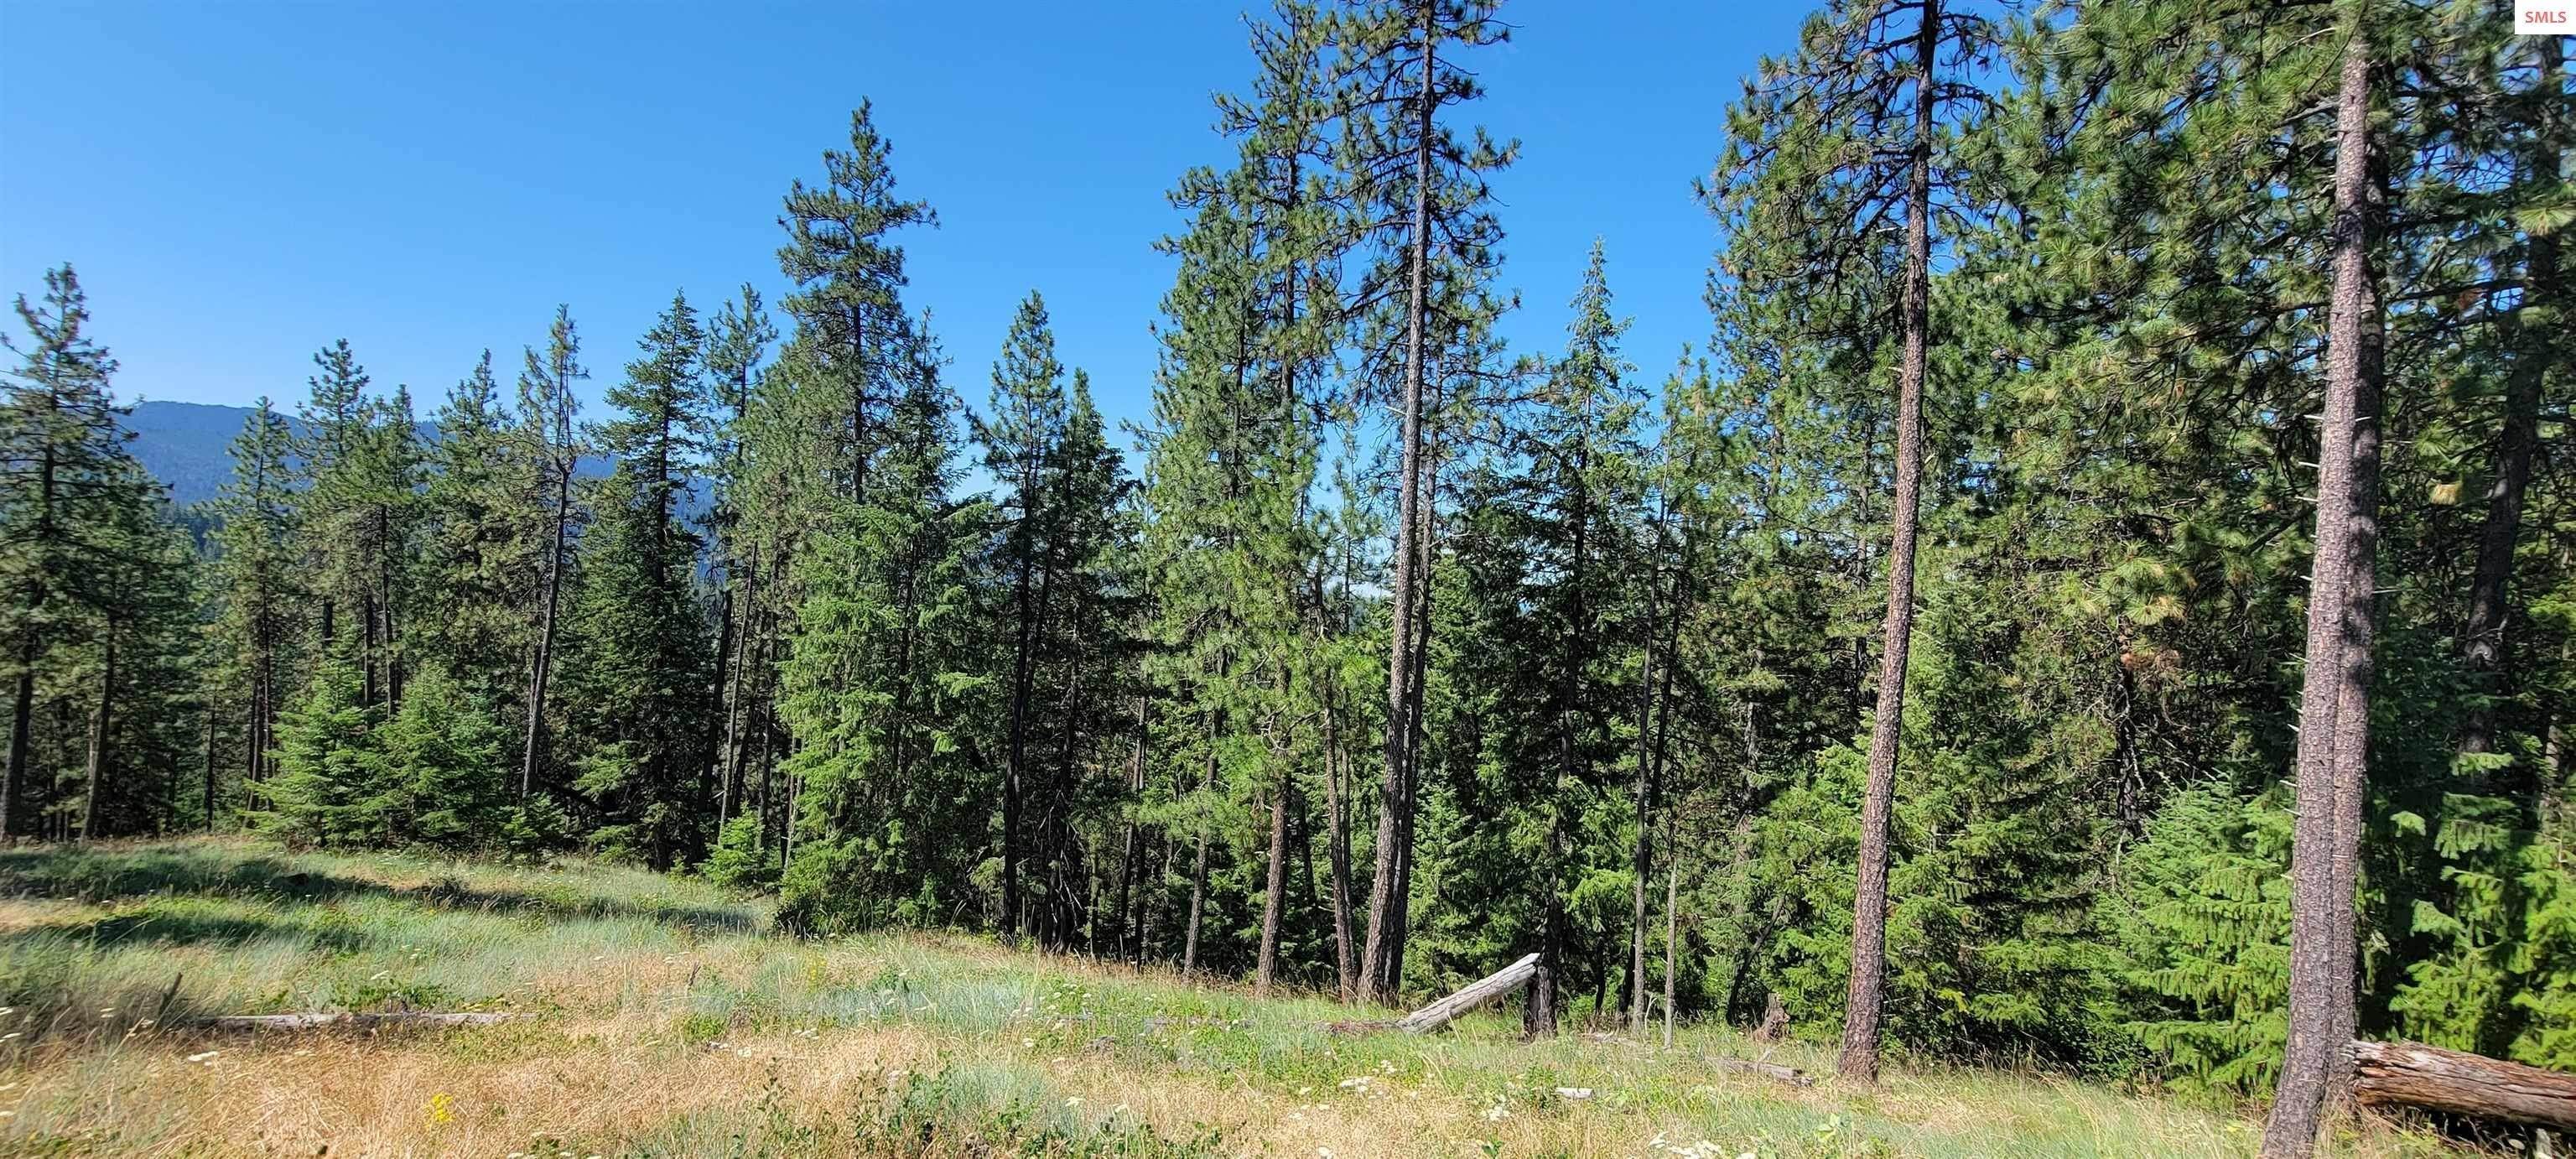 28. Land for Sale at NNA Bobsled Trail Coeur d’Alene, Idaho 83814 United States